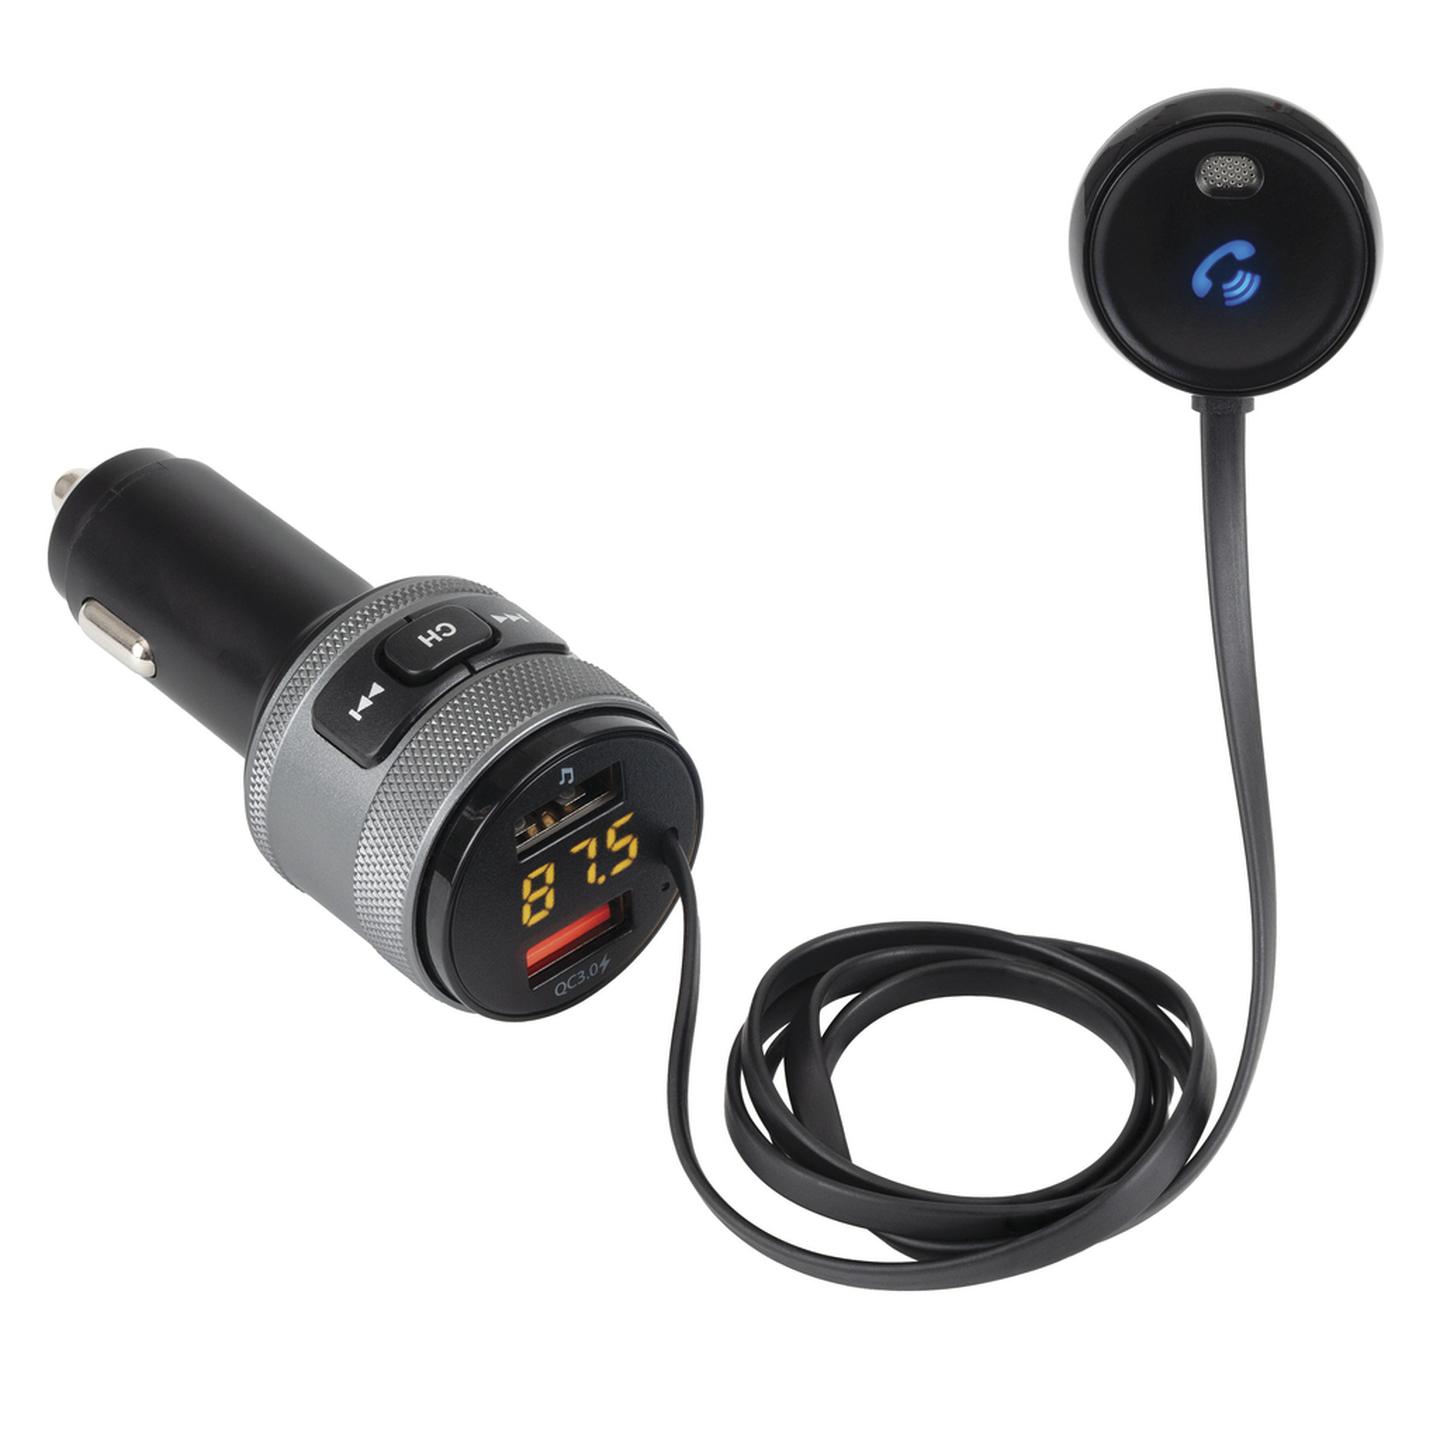 Digitech FM Transmitter with Bluetooth Technology USB and Microphone Extension